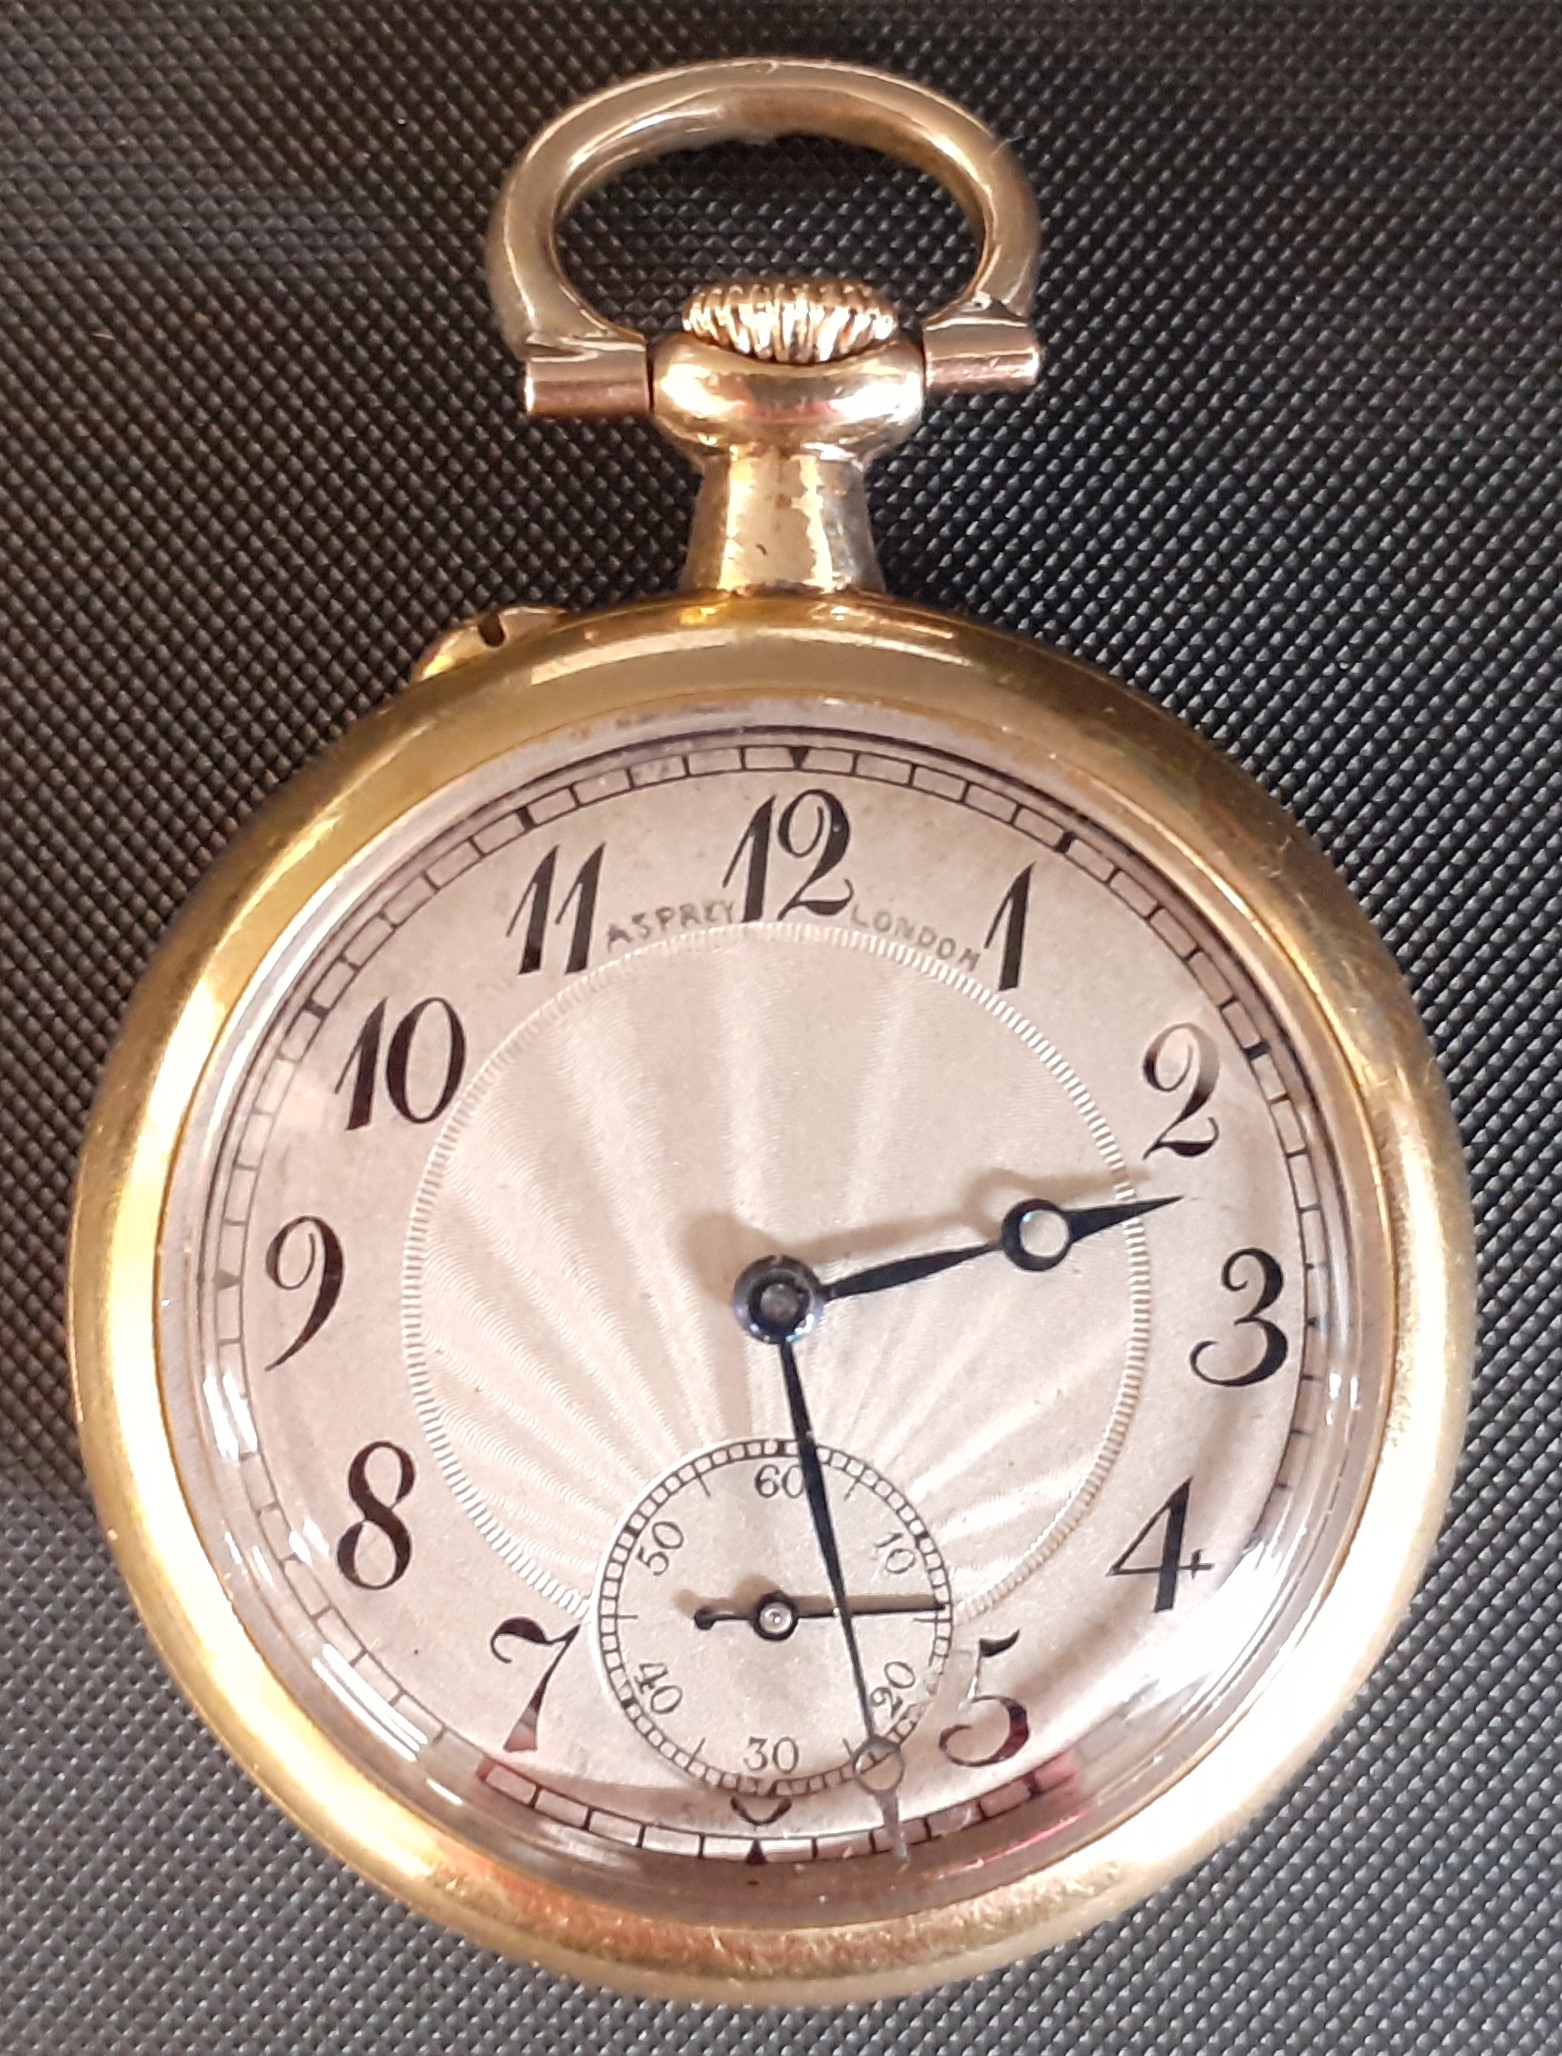 18k gold fob watch with subsidiary seconds dial, engine turned face, with believed to be later